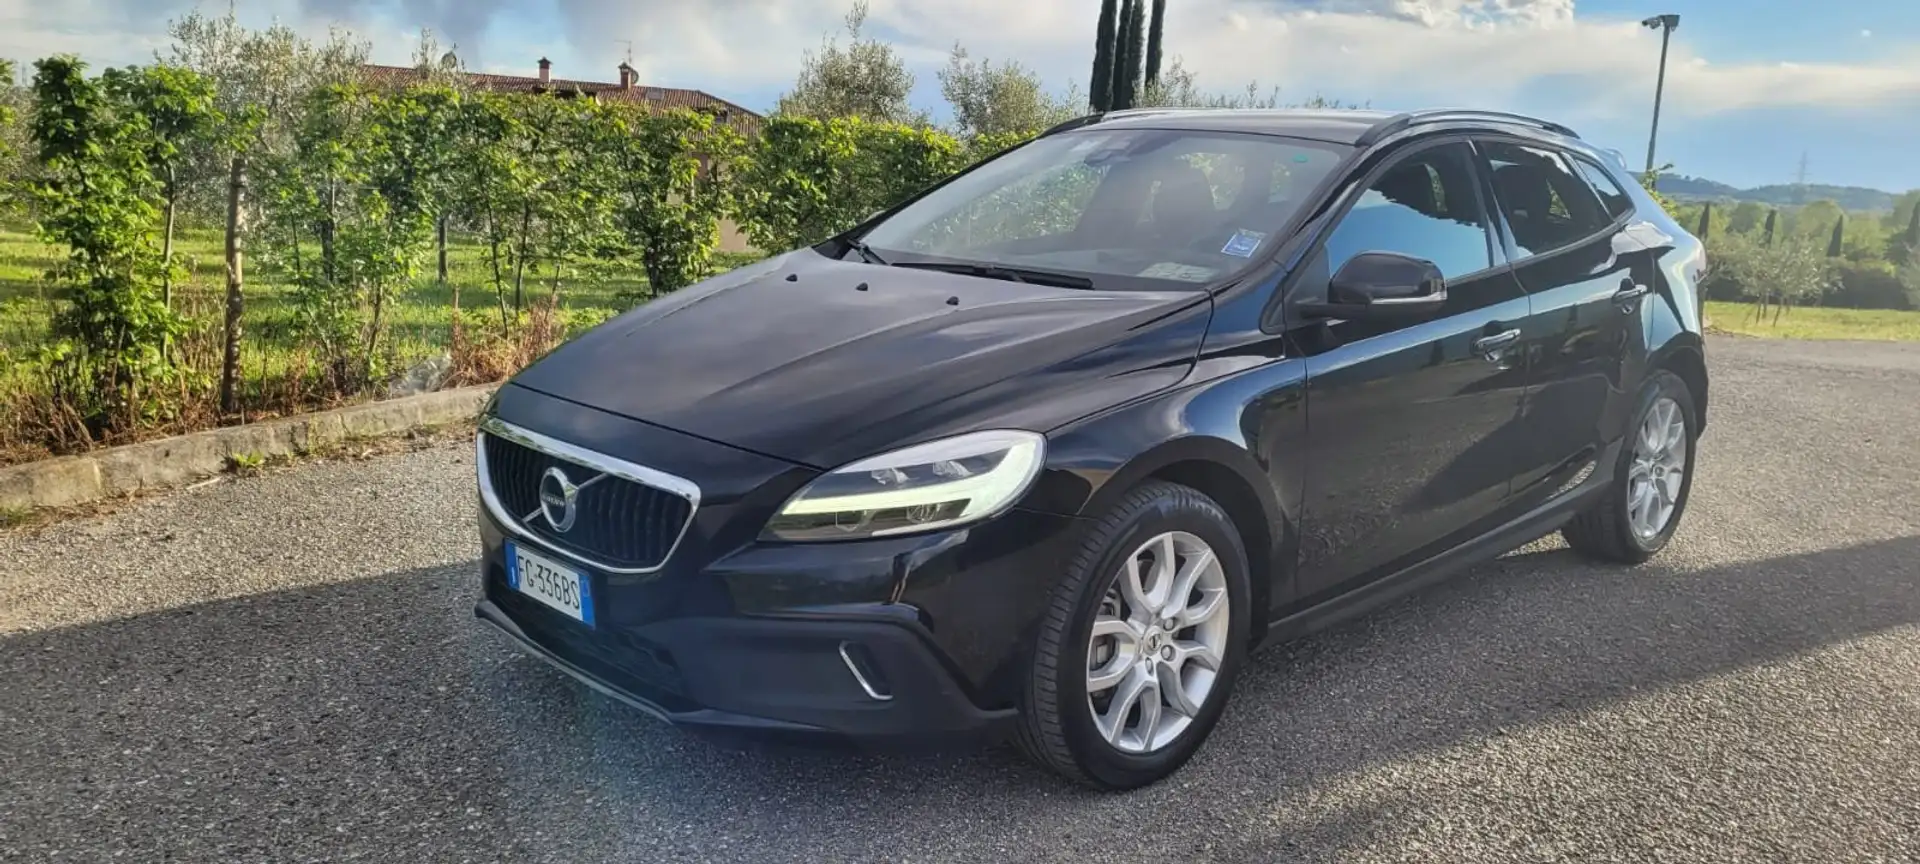 Volvo V40 Cross Country V40 Cross Country 2.0 d3 Momentum geartronic crna - 1